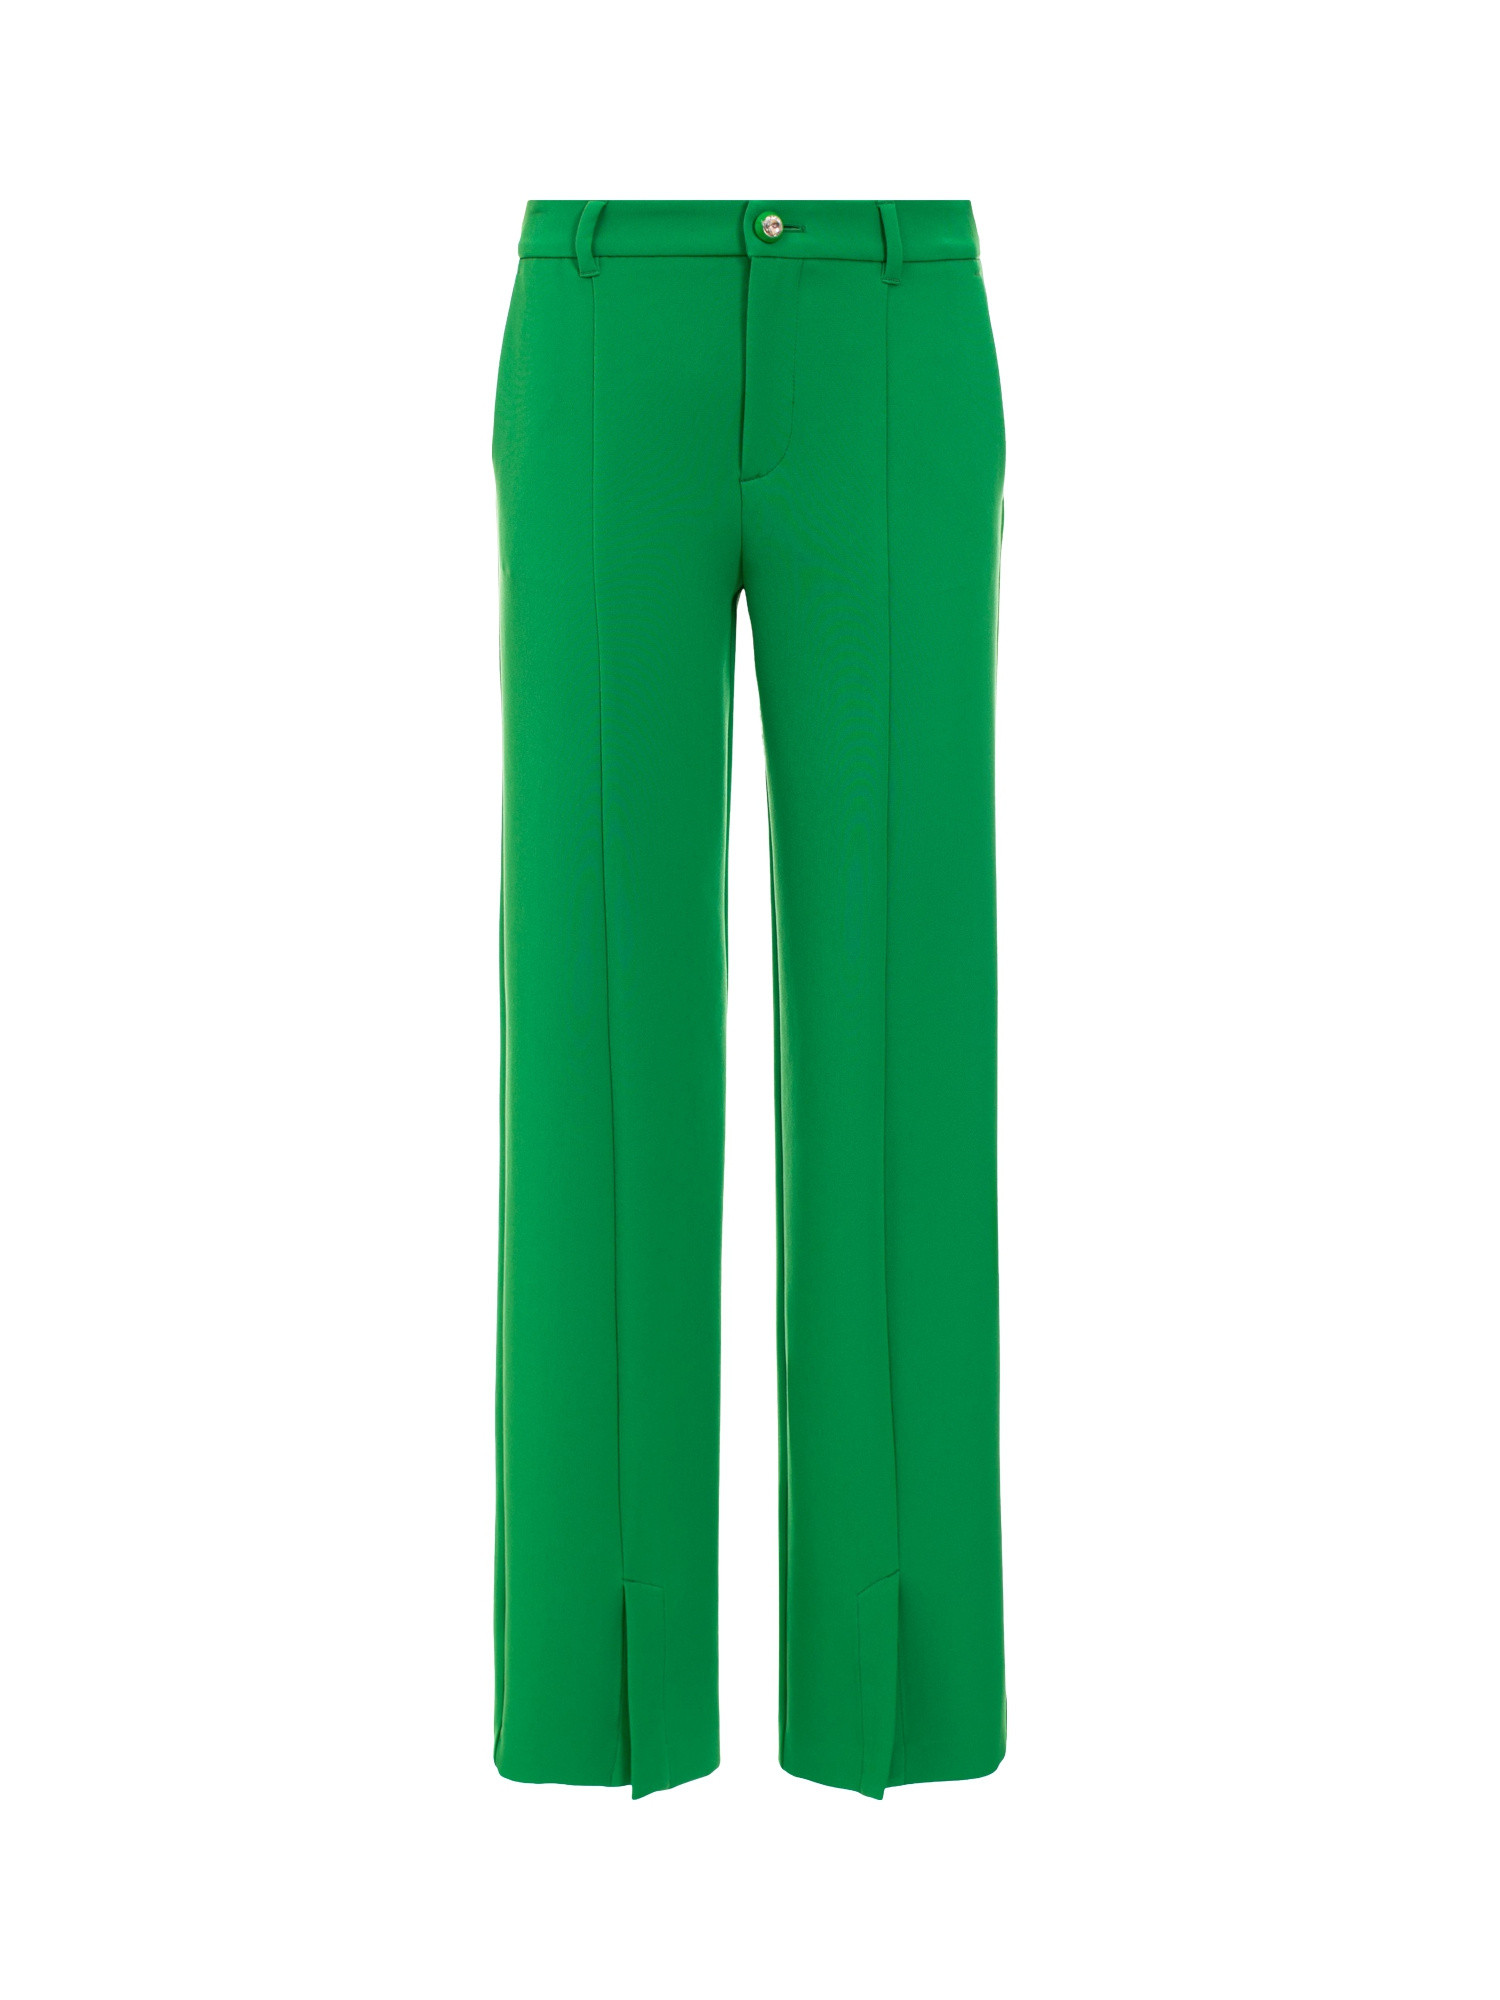 Chiara Ferragni - Bistretch cady trousers, jewel button and slit in the center front, soft line, Green, large image number 0